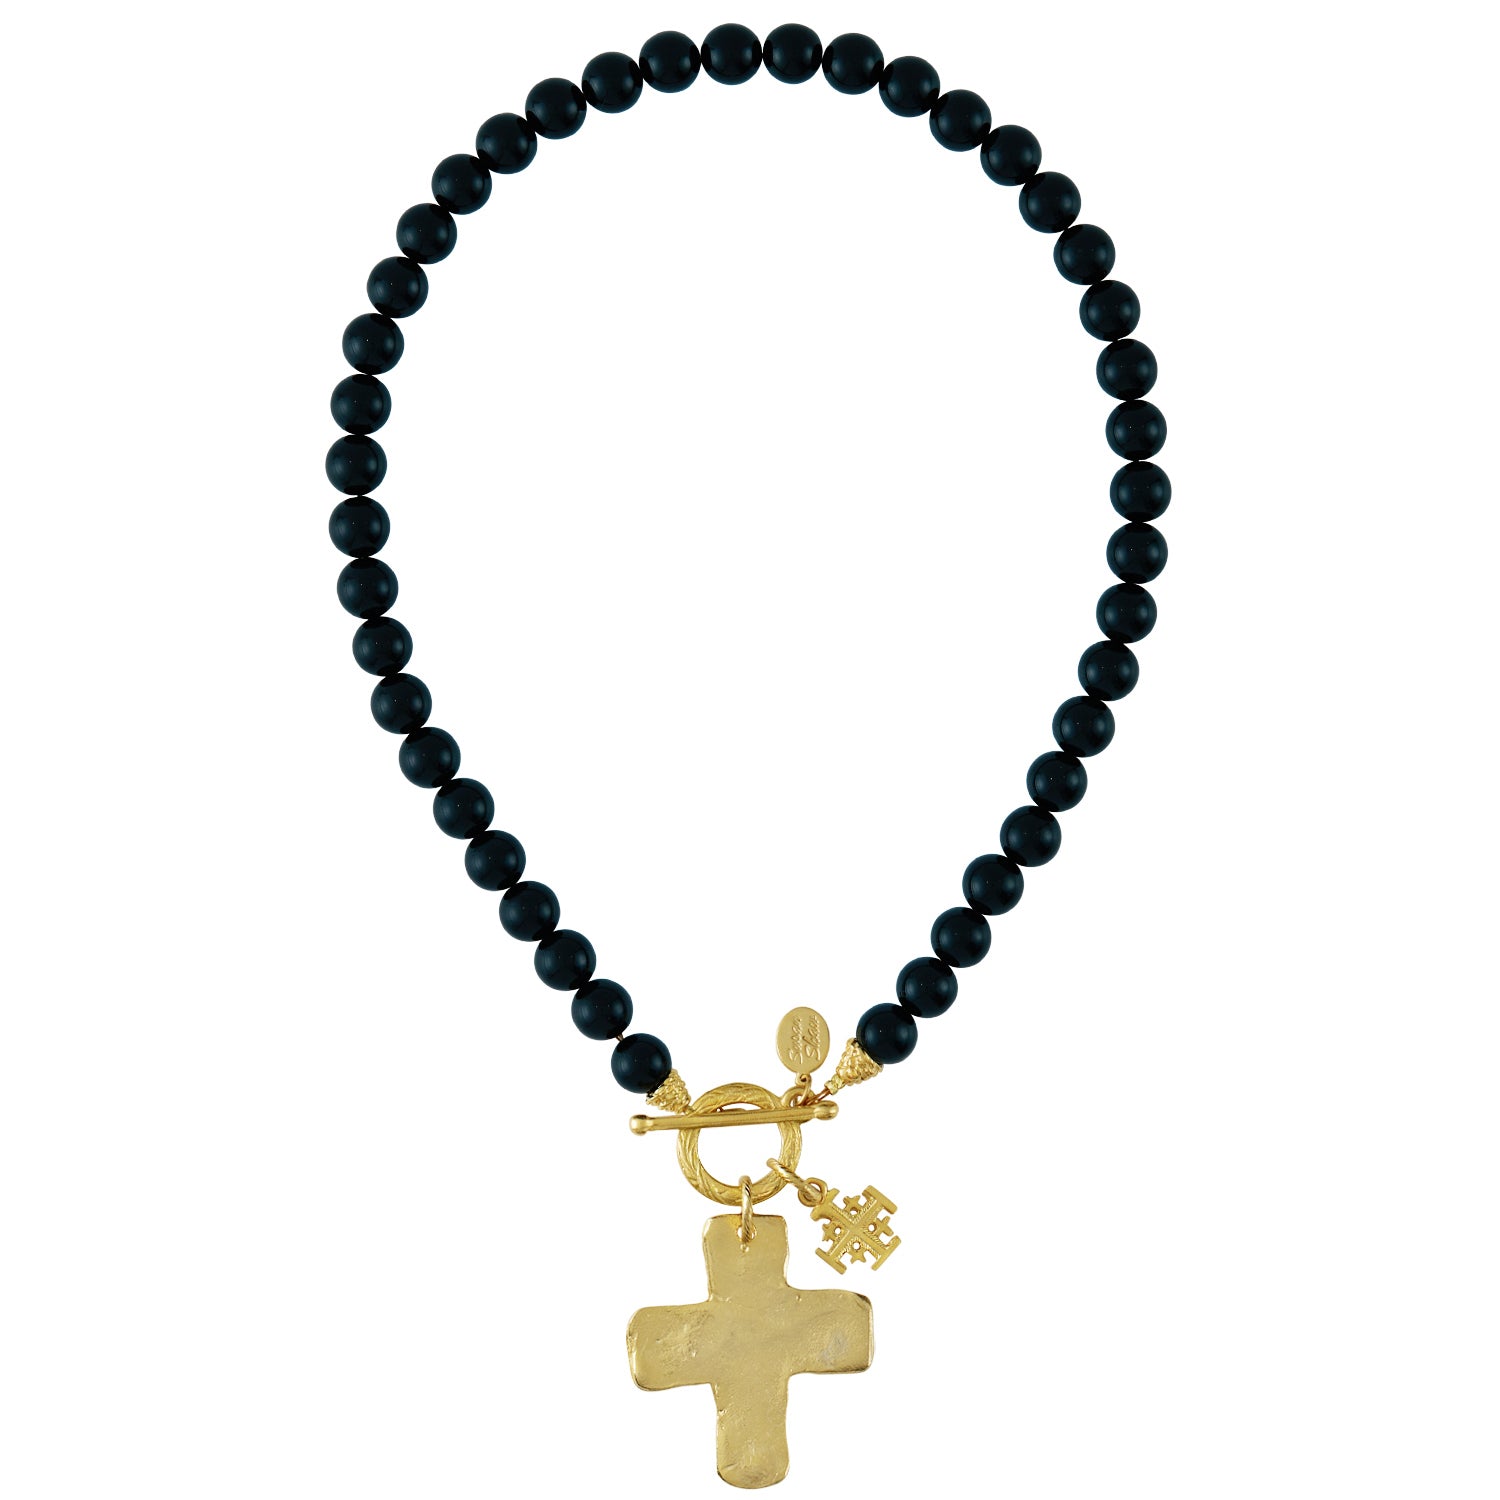 Susan Shaw 3212 Onyx Necklace with Gold Cross